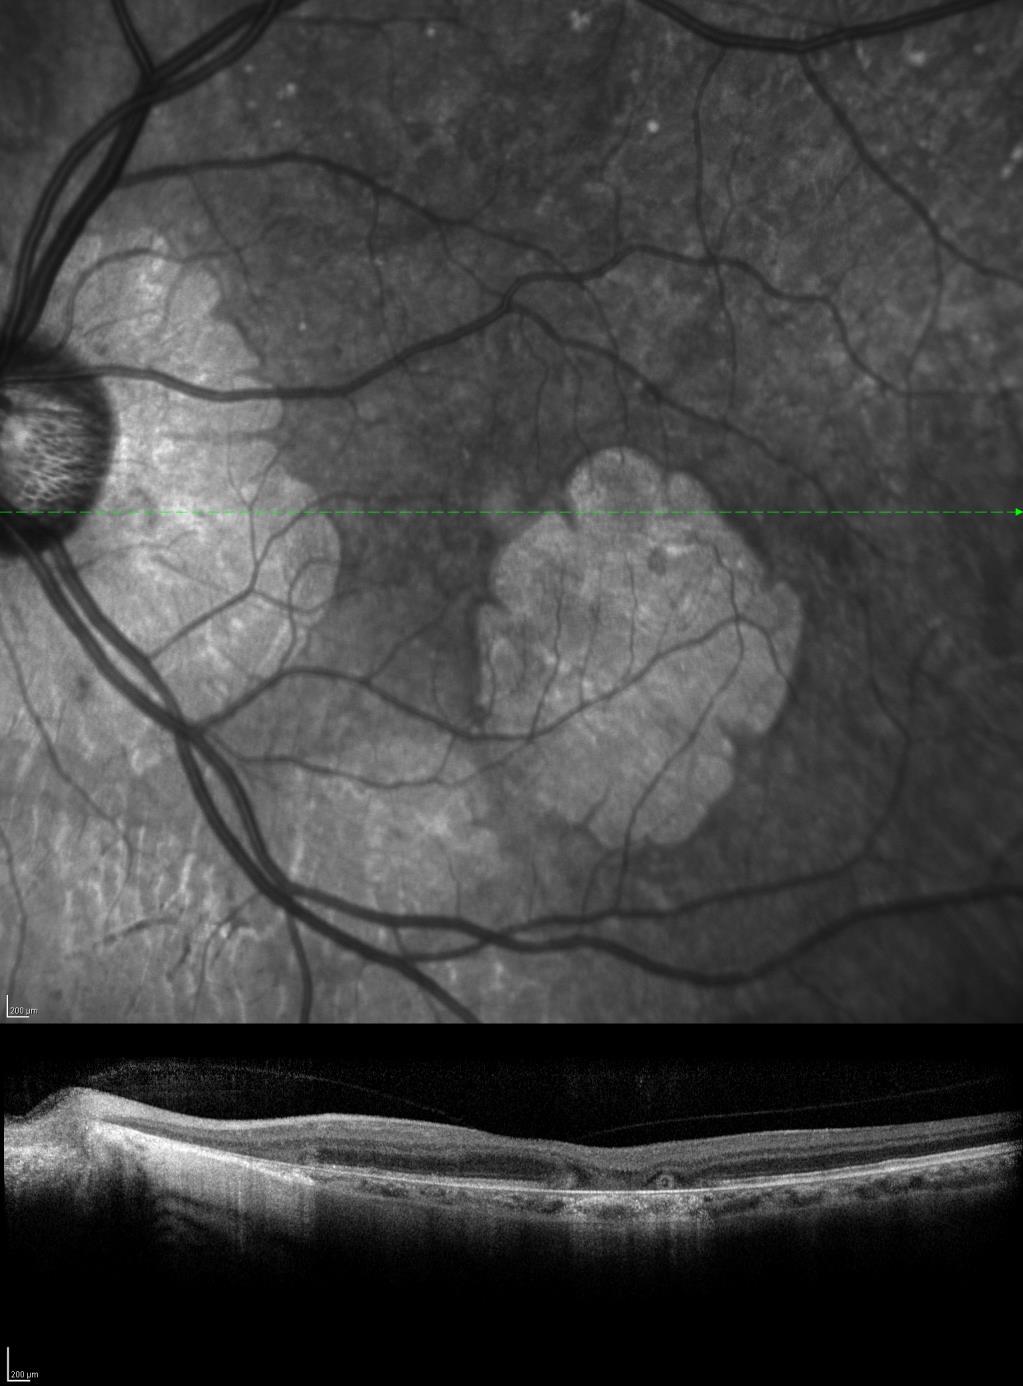 Supplemental Figure 4: IR and OCT images from the left eye of symptomatic carrier 13132 showing large regions of RPE atrophy in the macula, including the foveal region.